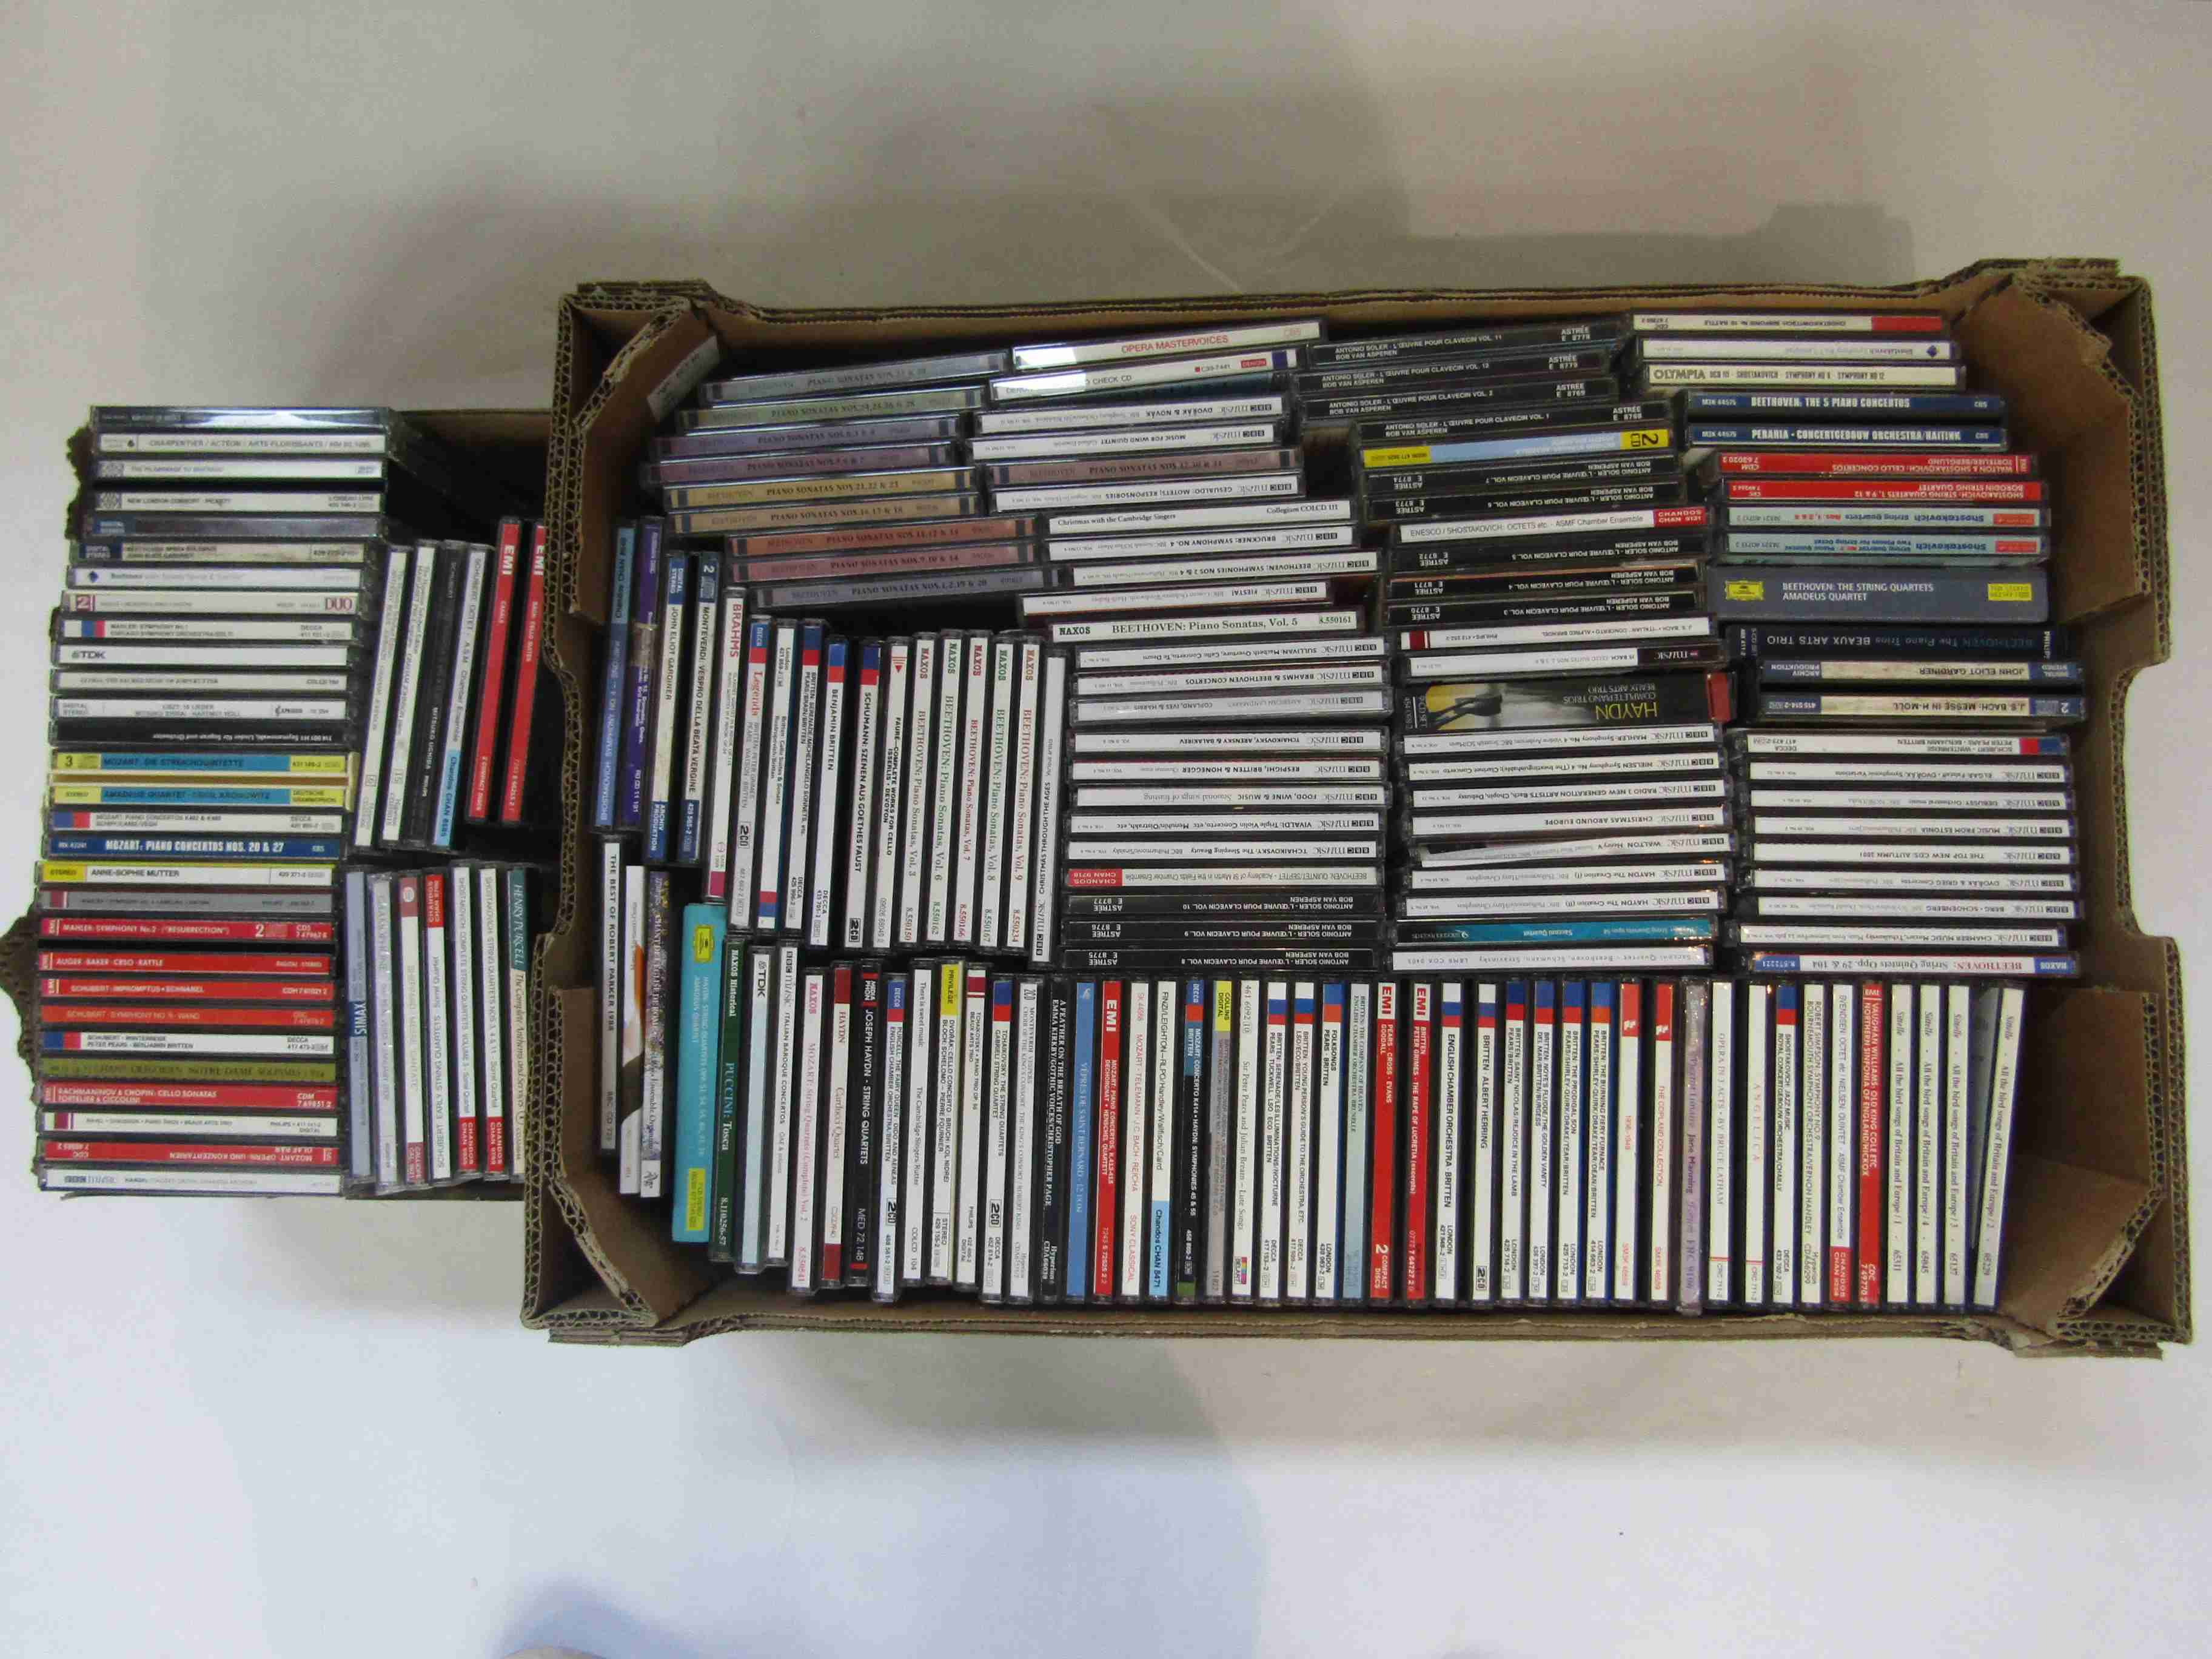 Approximately 175 assorted Classical CDs